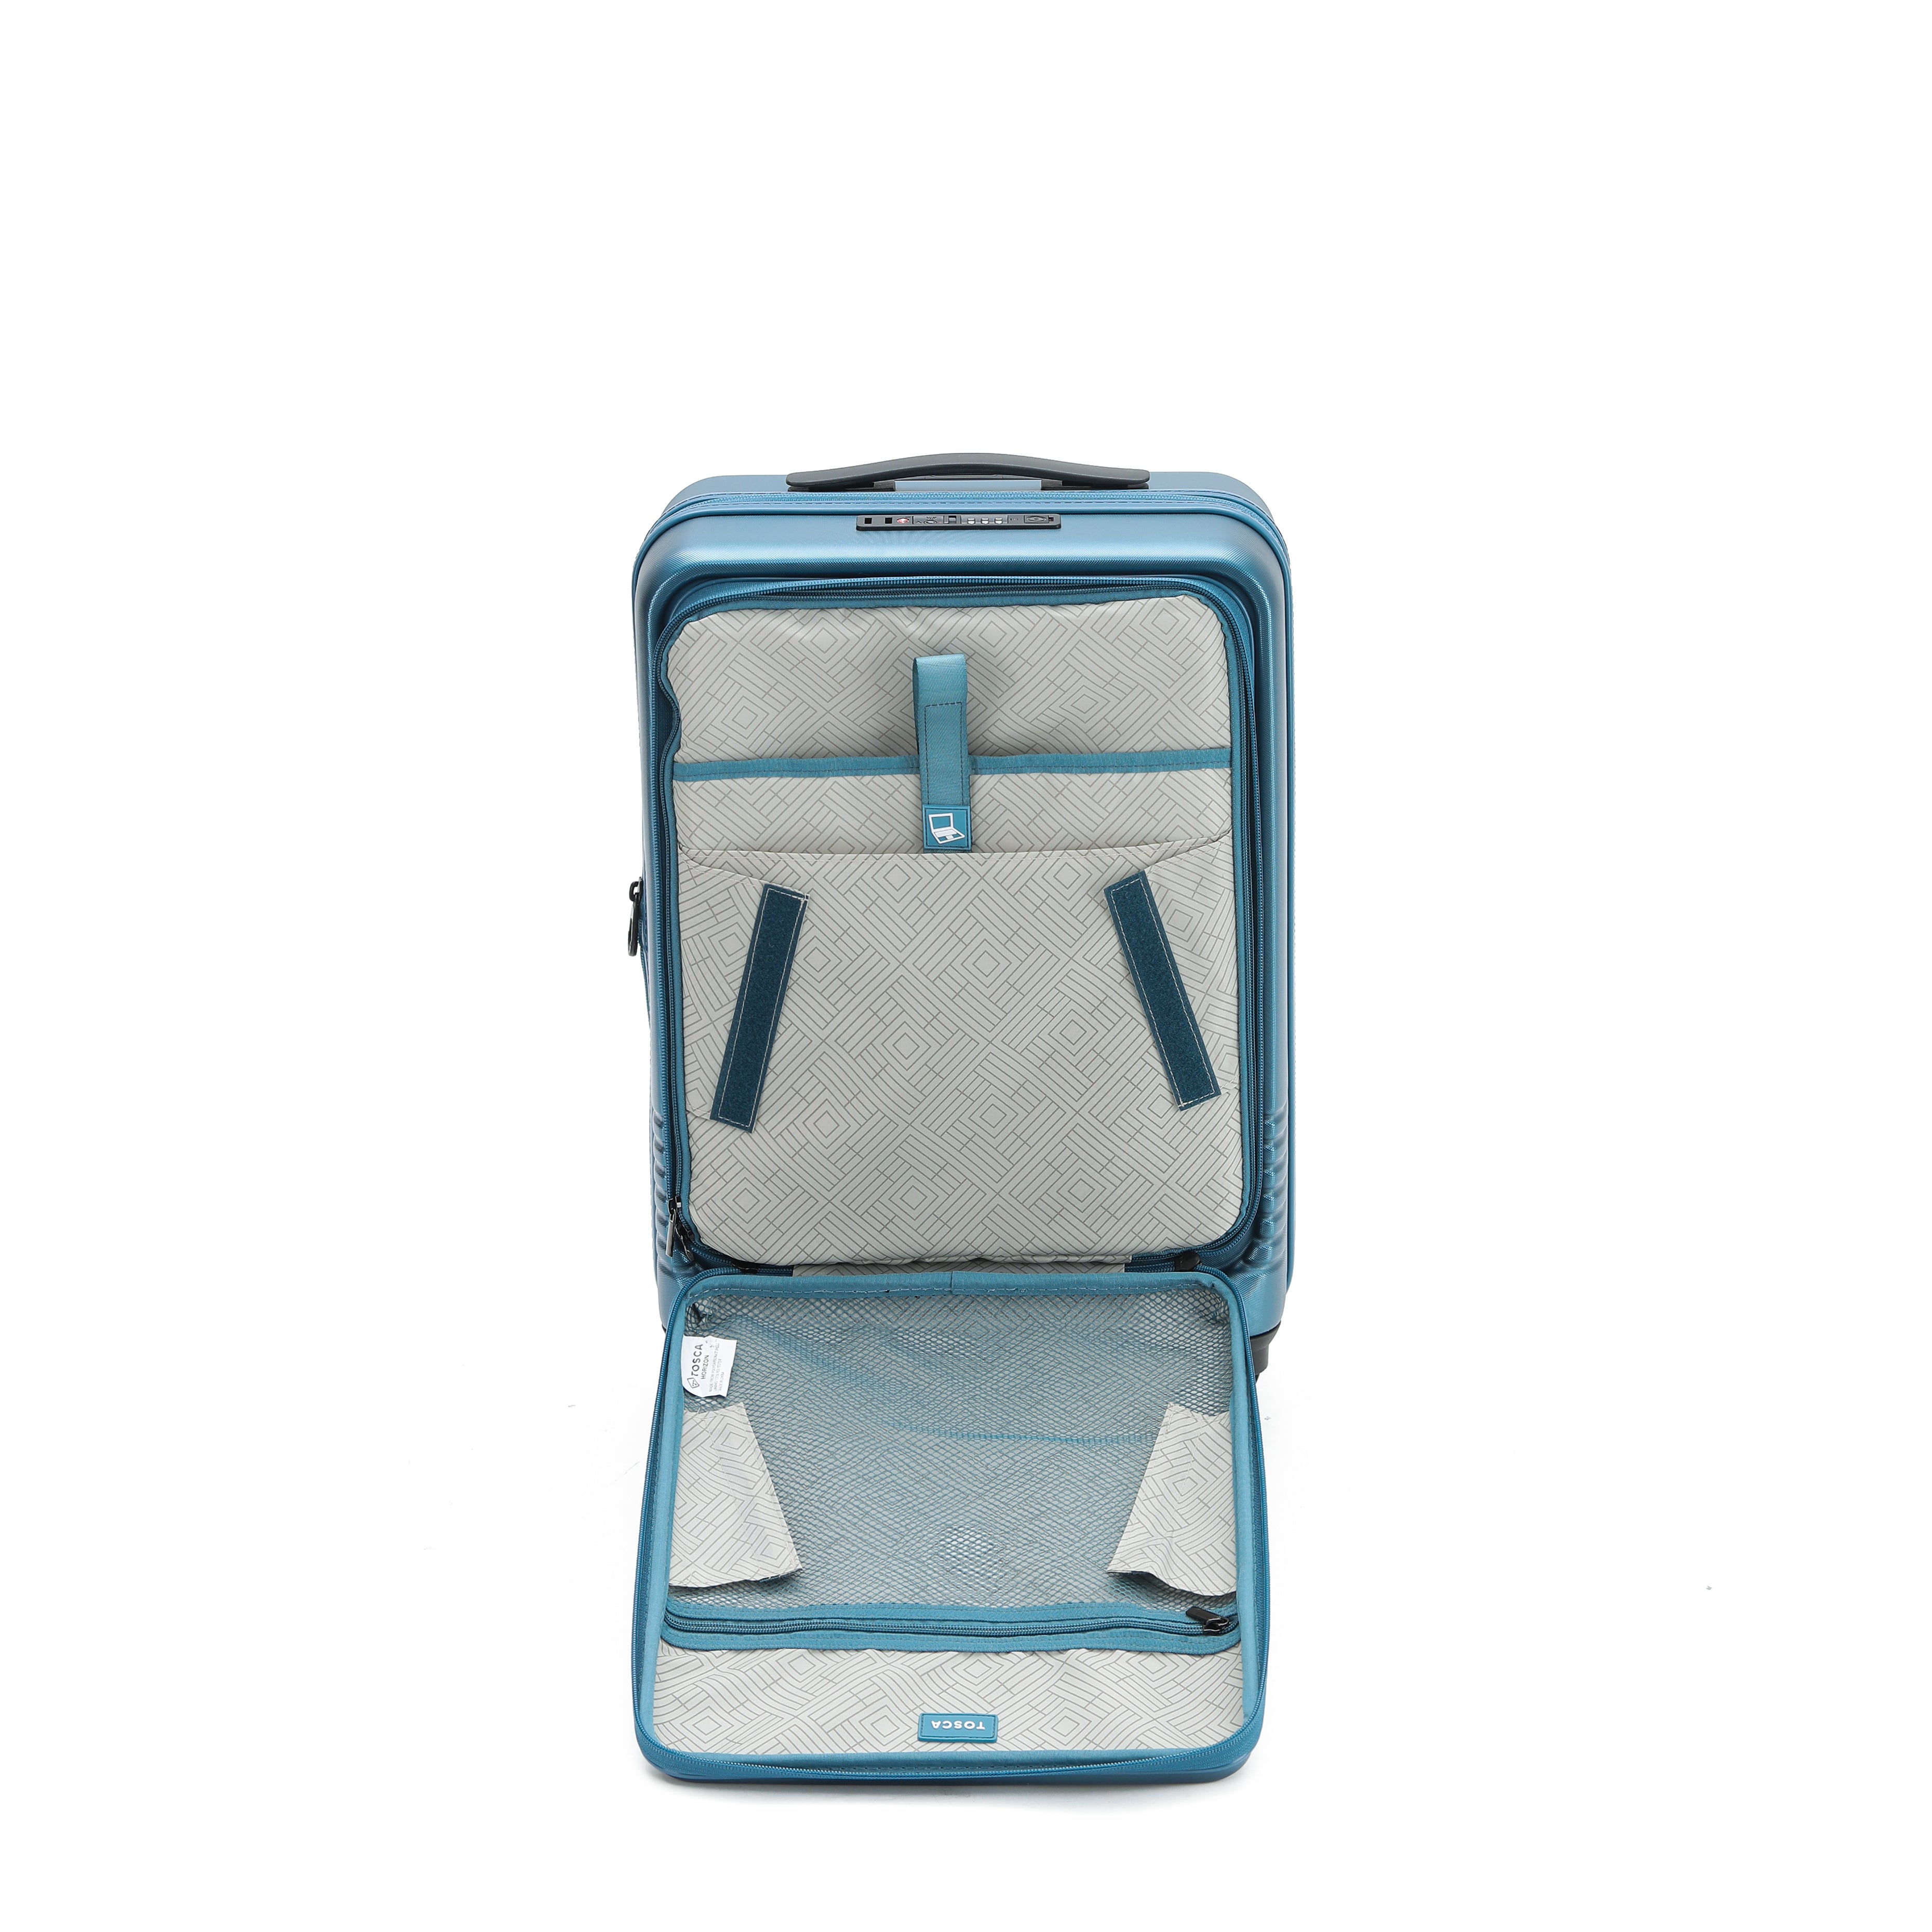 Tosca - TCA644 Horizon Front lid opening Set of 3 suitcases - Blue-11